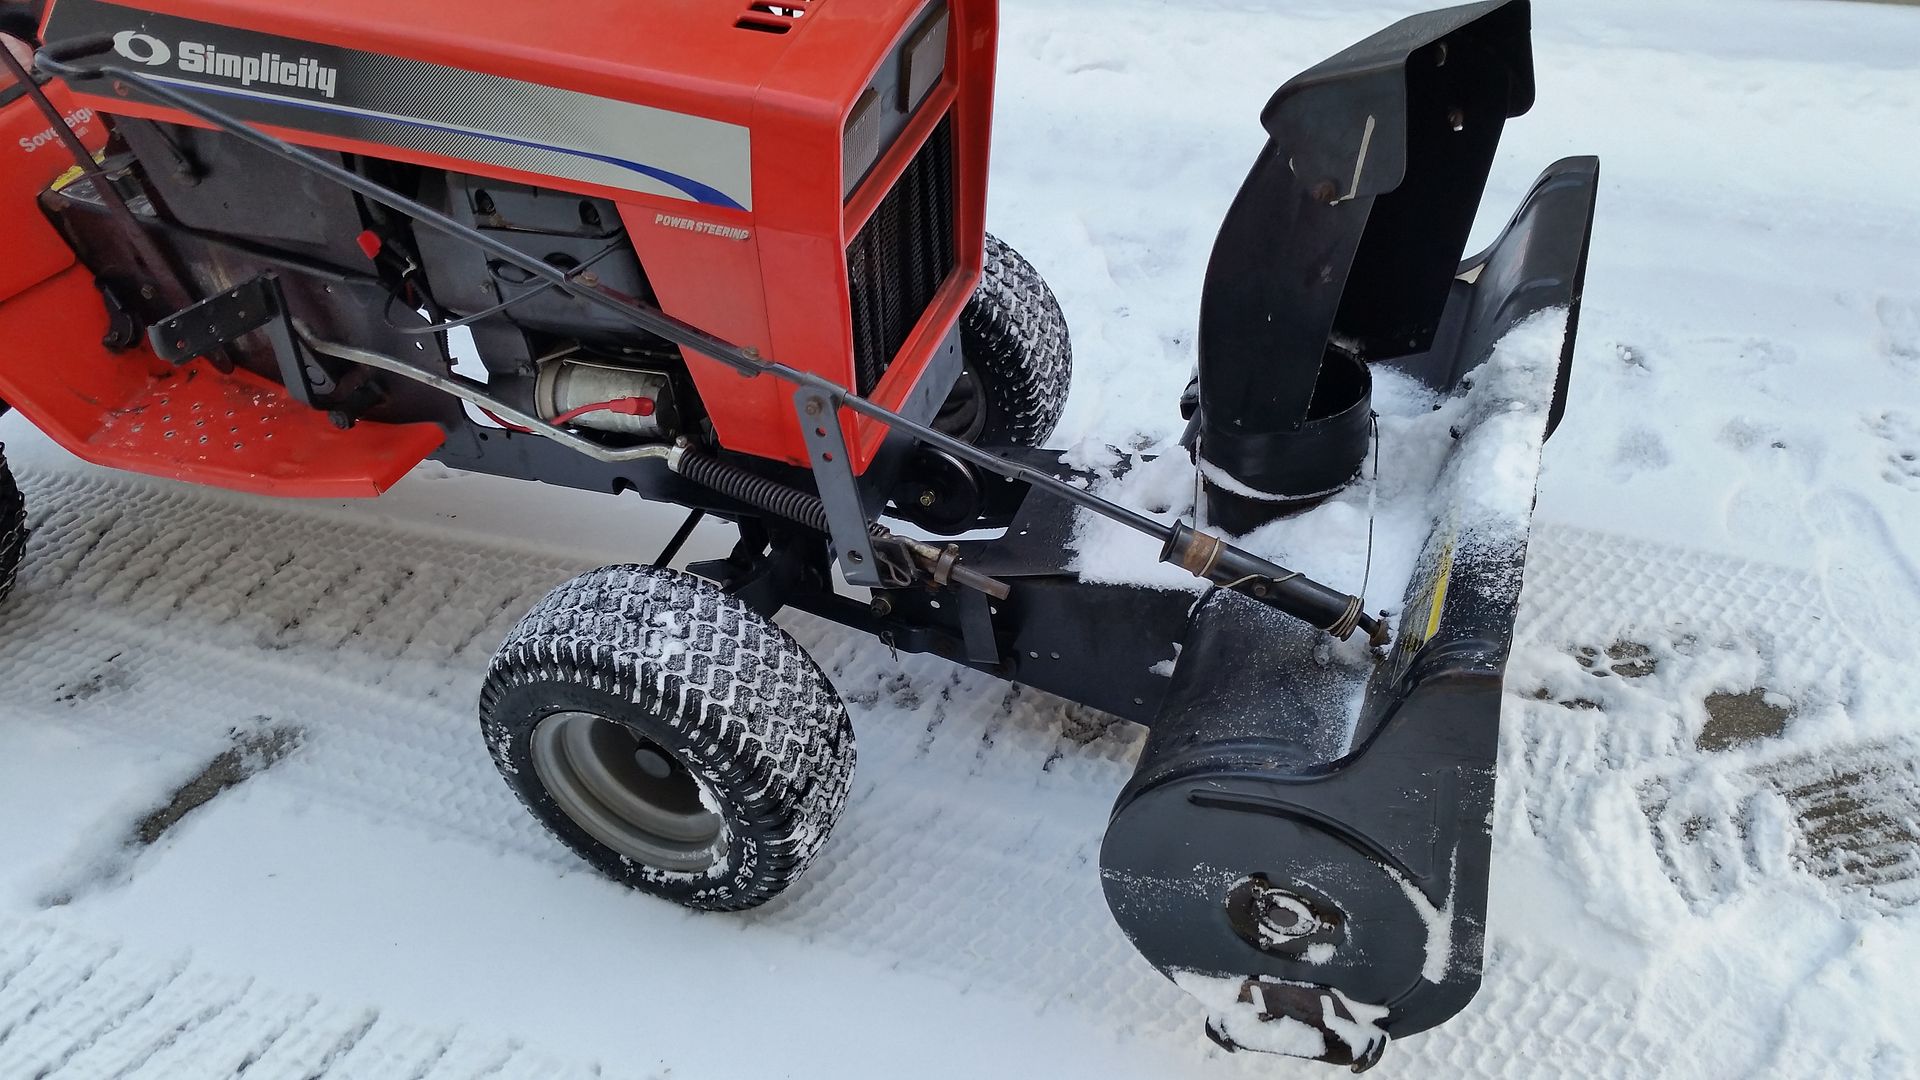 Where to buy for sale Simplicity snow blower attachments?